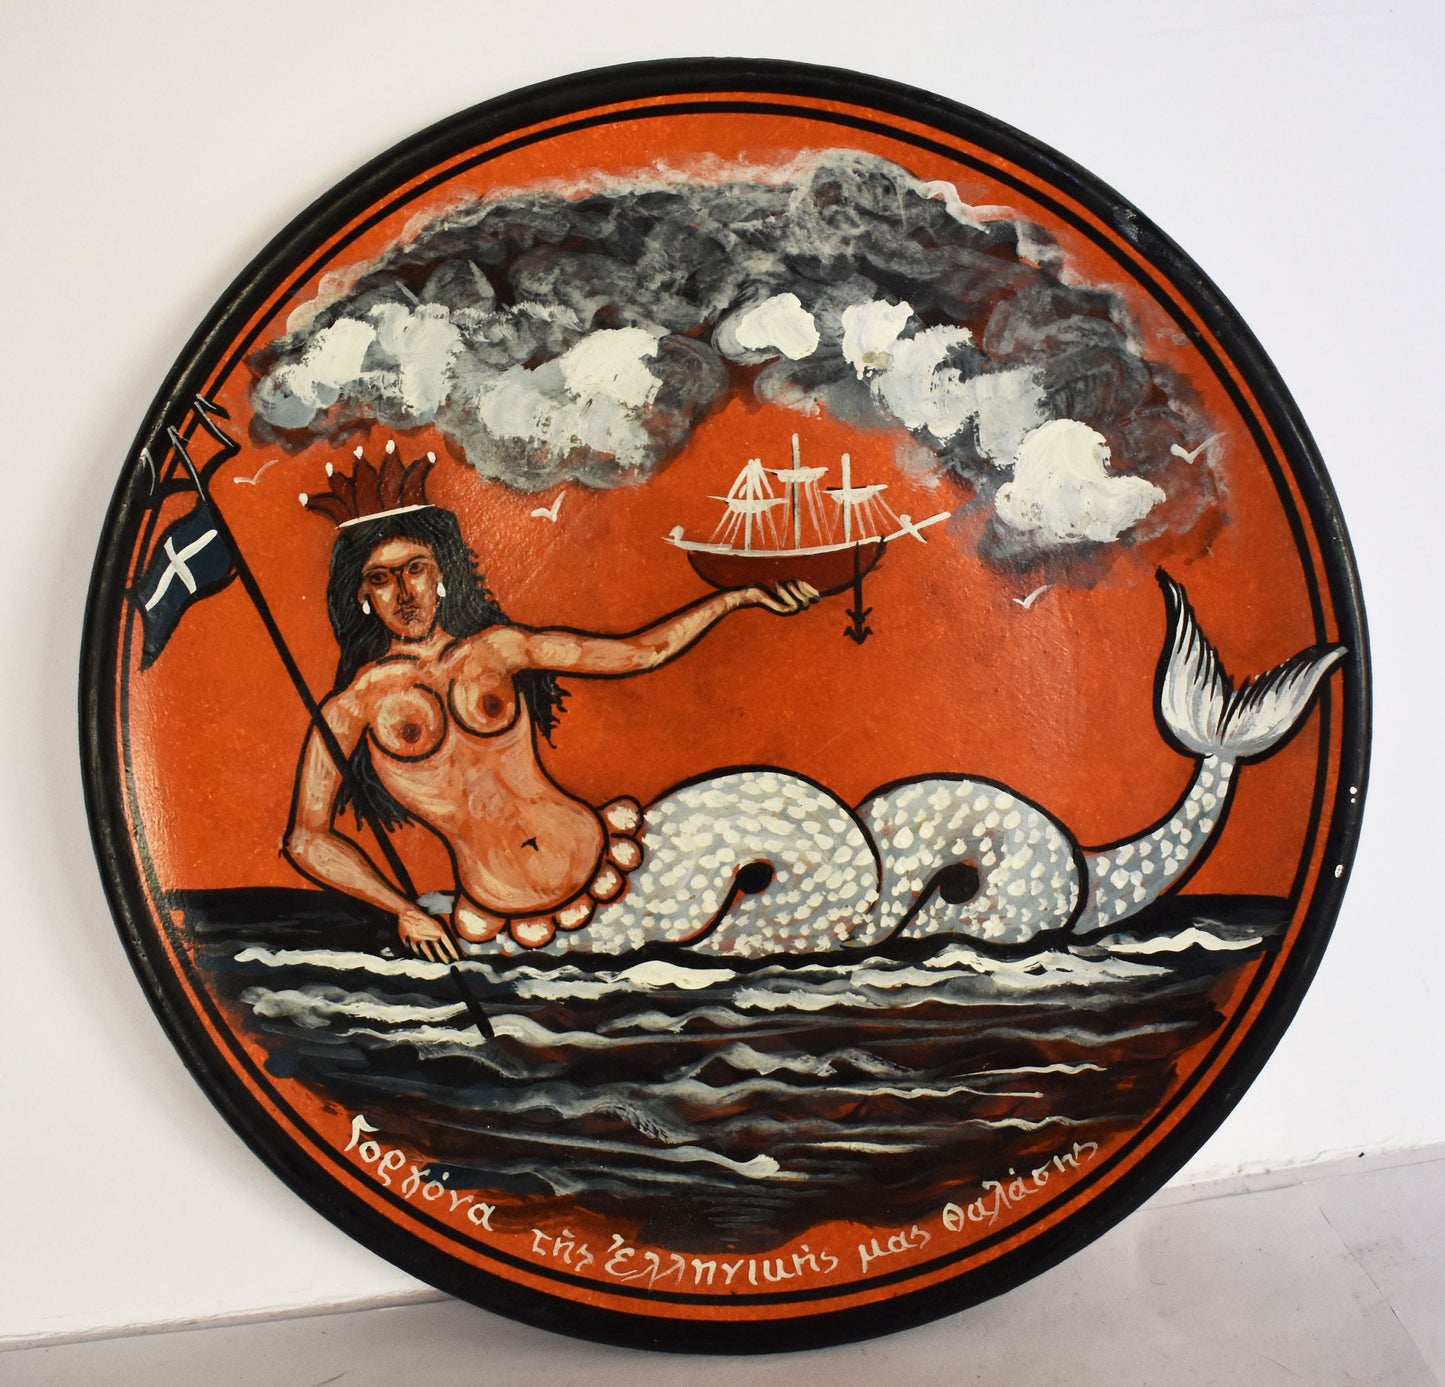 Thessalonike - Sister of Alexander The Great - Fountain of Immortality Legend - Sailor's Question - Ceramic plate